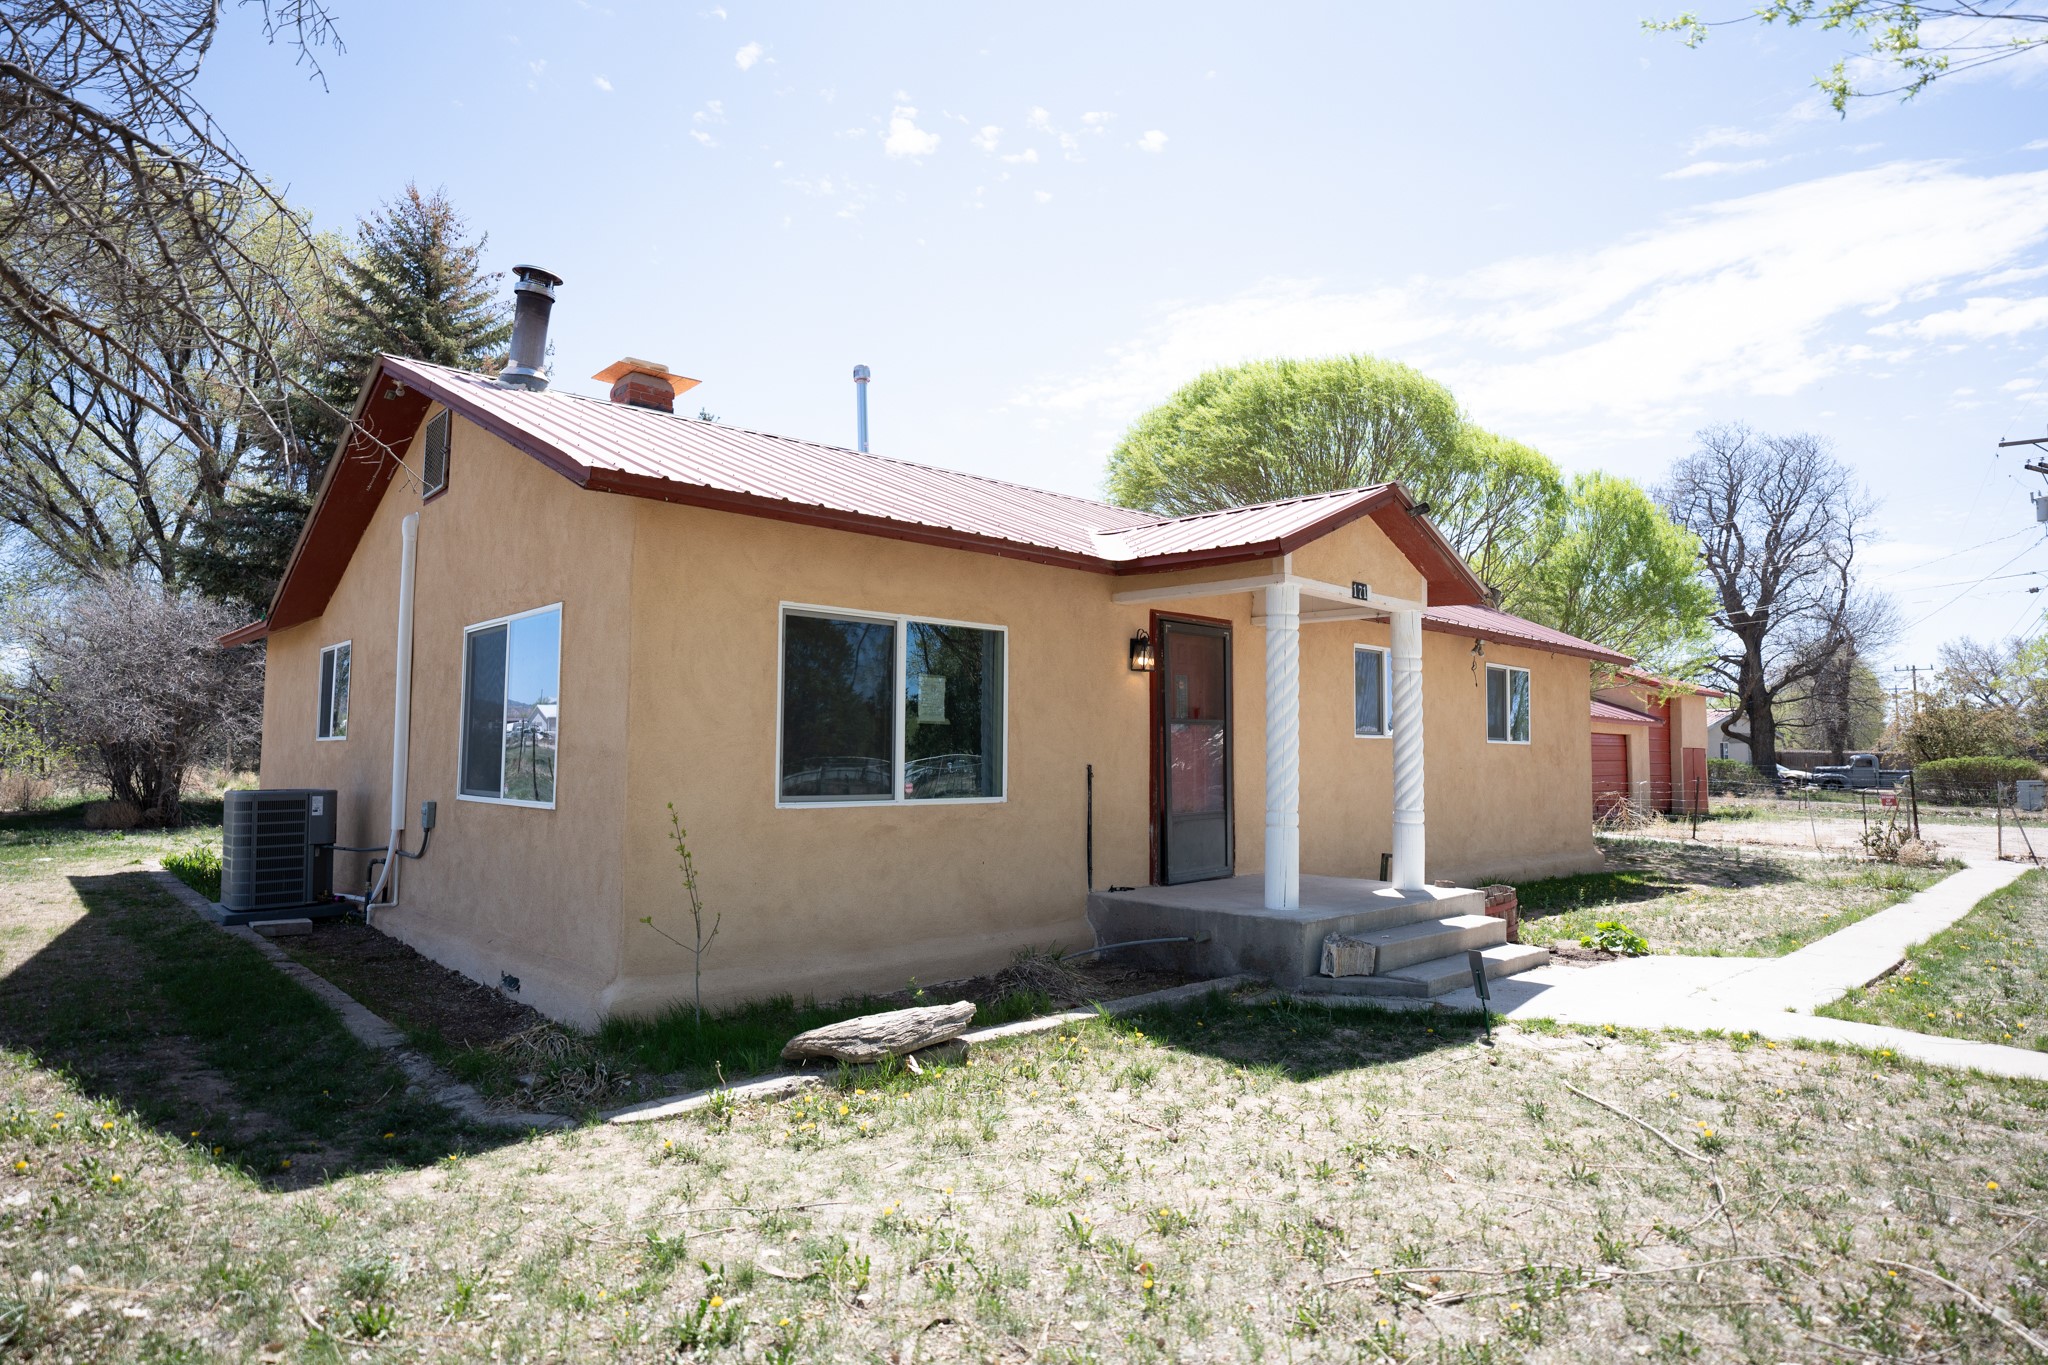 1715 N Mccurdy, Espanola, New Mexico 87532, 3 Bedrooms Bedrooms, ,2 BathroomsBathrooms,Residential,For Sale,1715 N Mccurdy,202401507